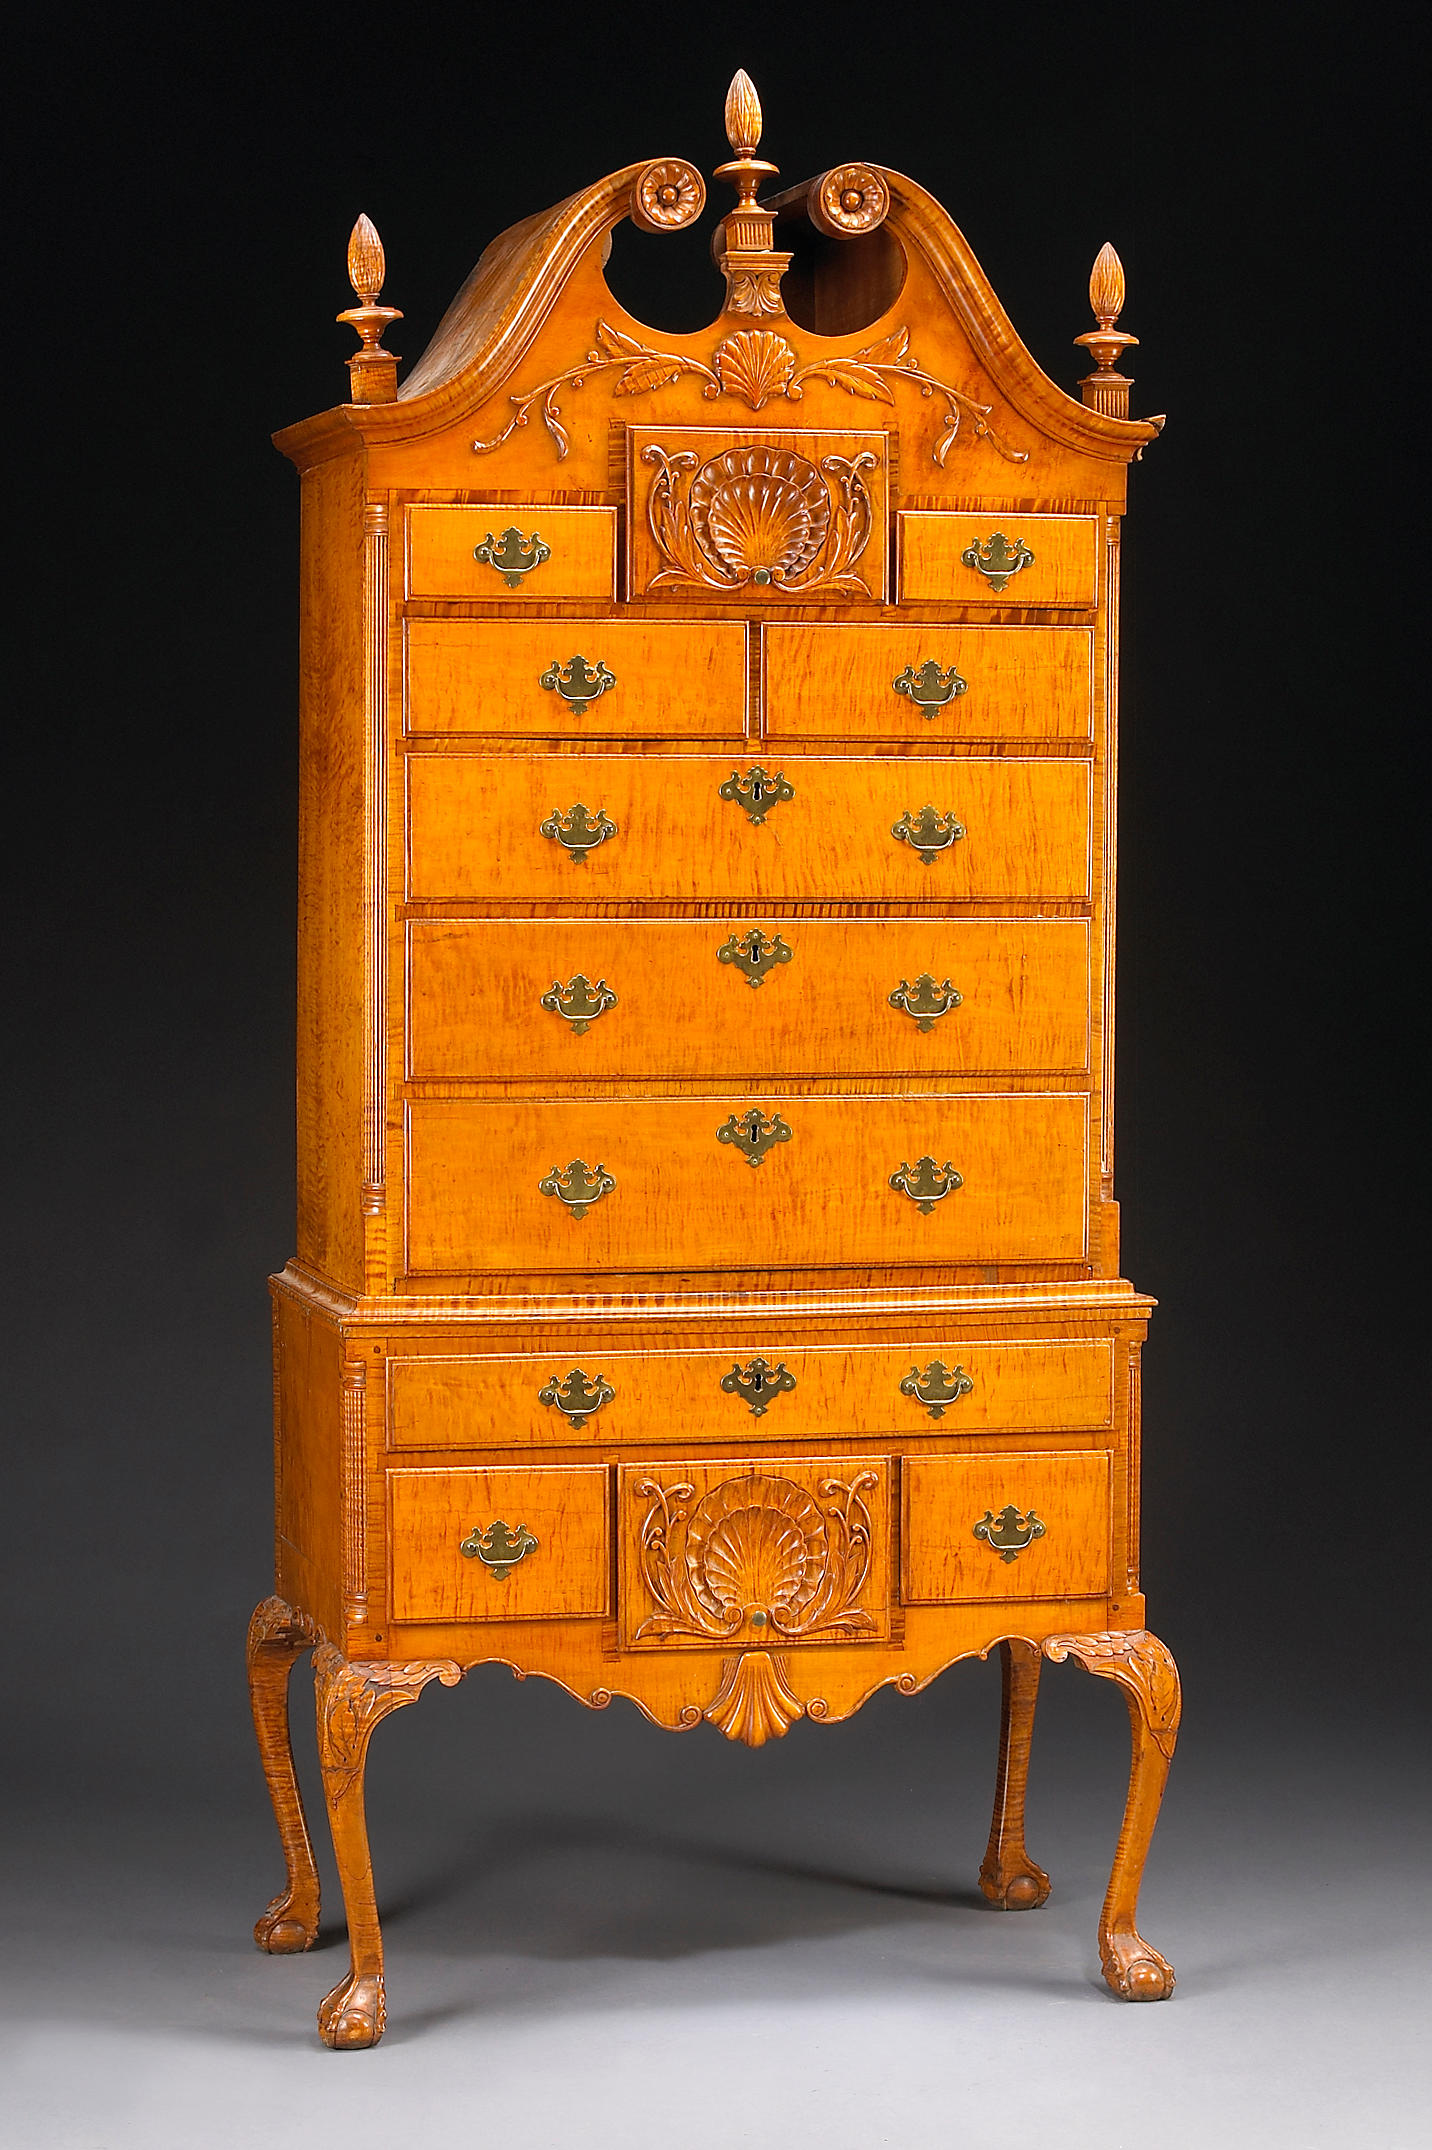 Auktion Fine European And American Furniture And Decorative Arts